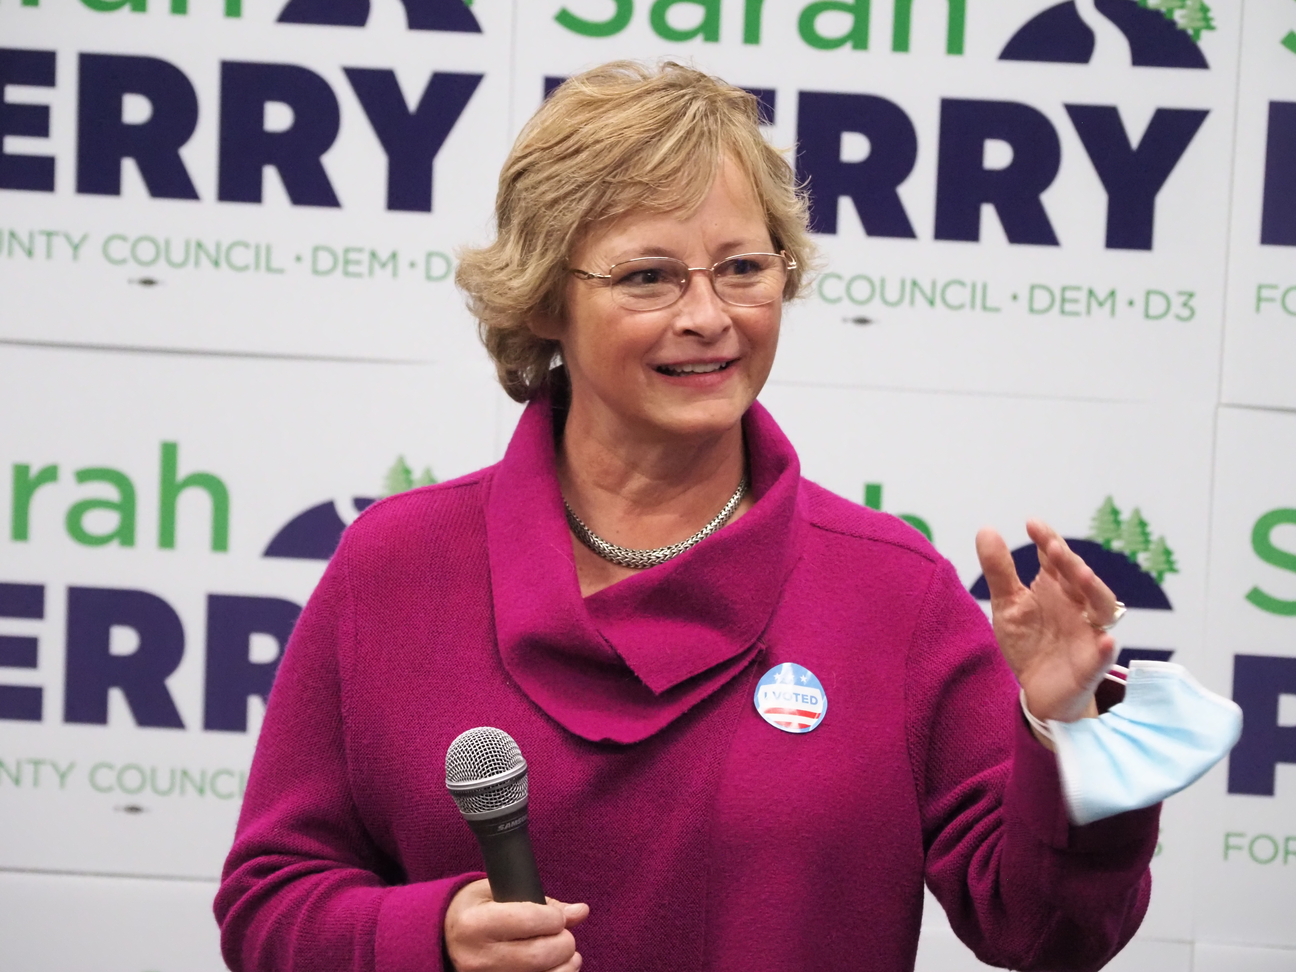 Sarah Perry speaks at her Election Night victory party